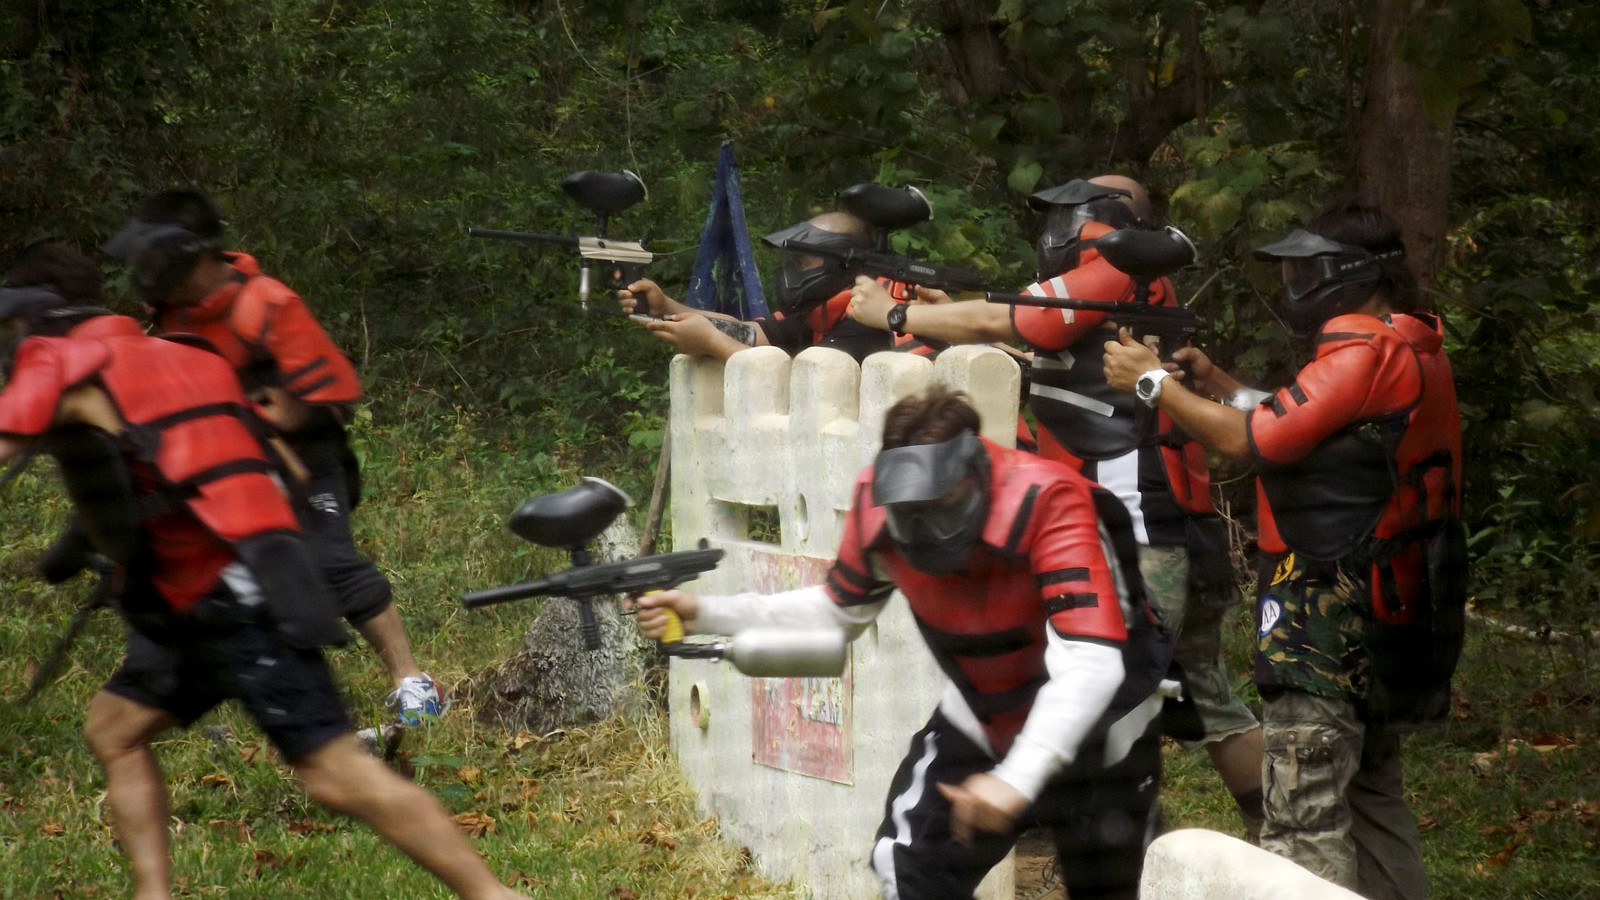 Paintball is a great way to spend a day in Puerto Galera. One of the best activities you can find around Puerto Galera, Oriental Mindoro.